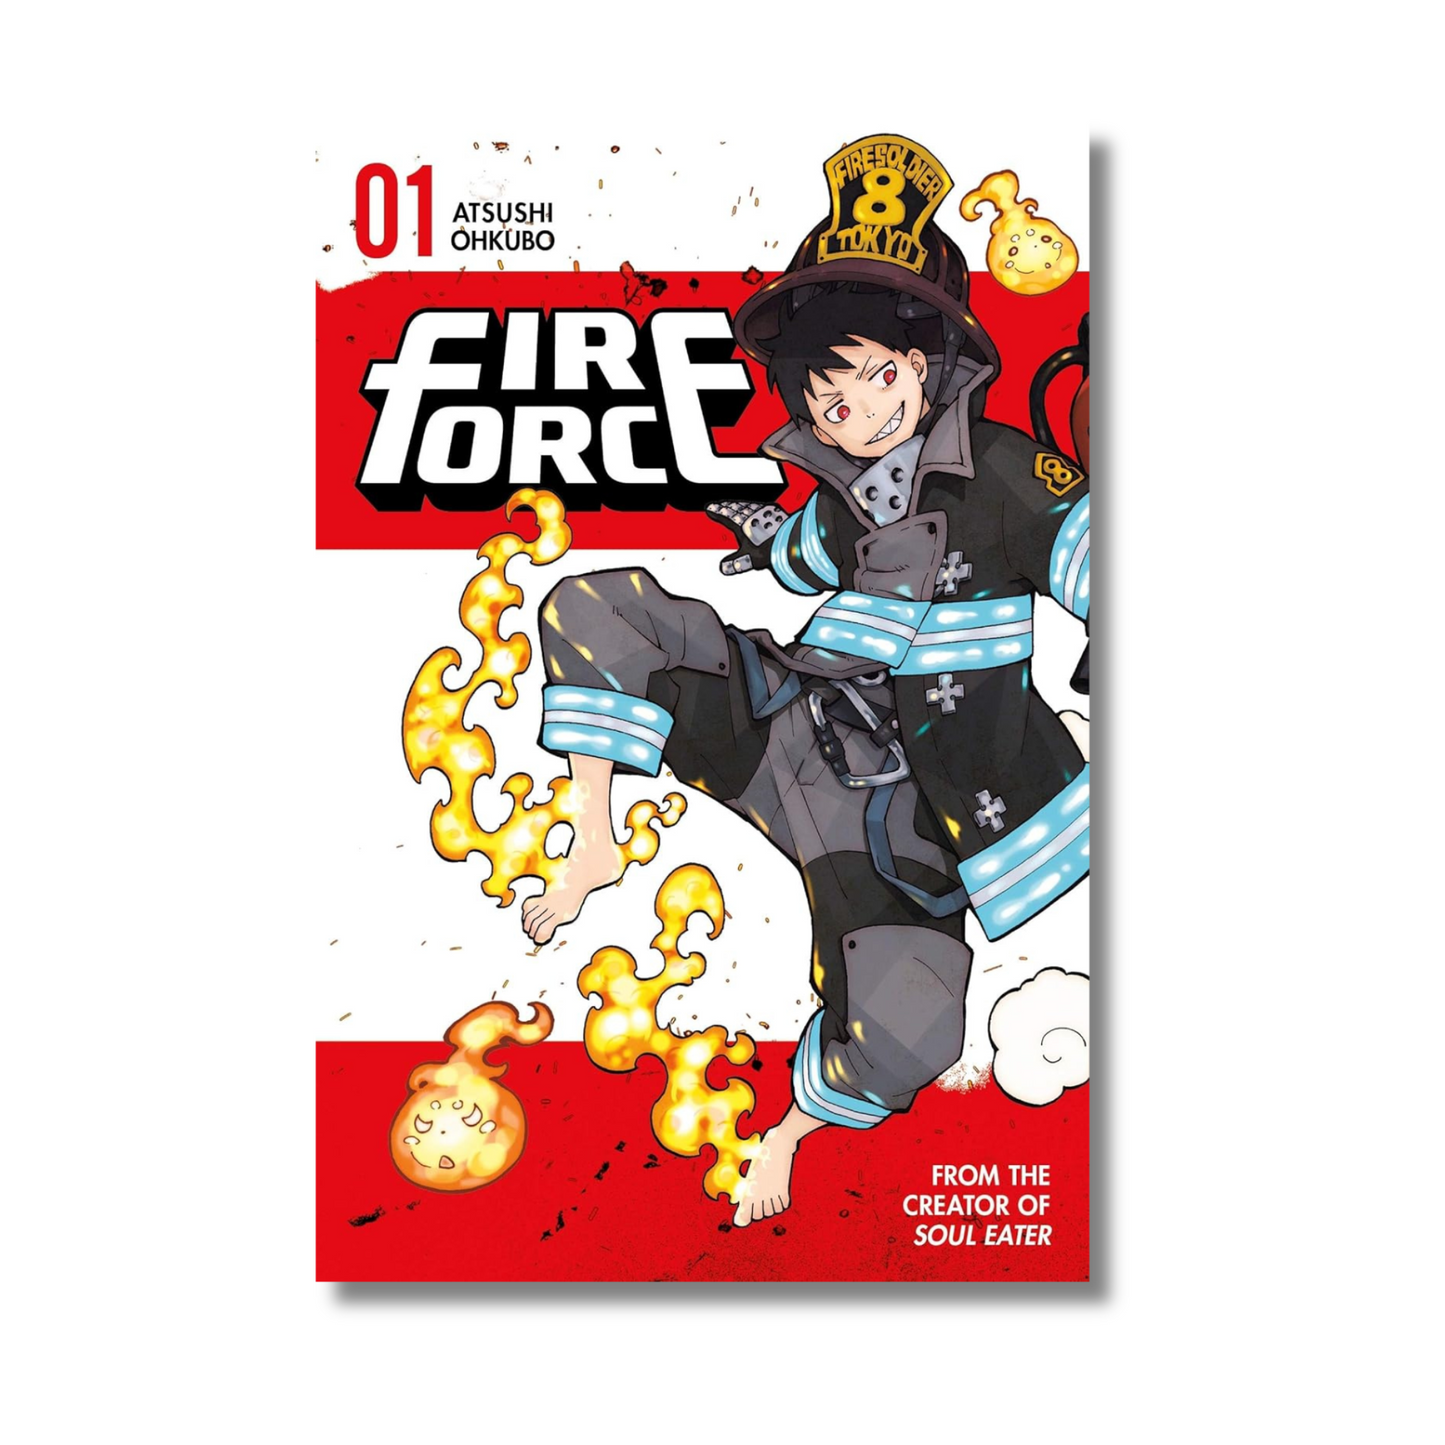 Fire Force Vol 1 By Atsushi Ohkubo (Paperback)